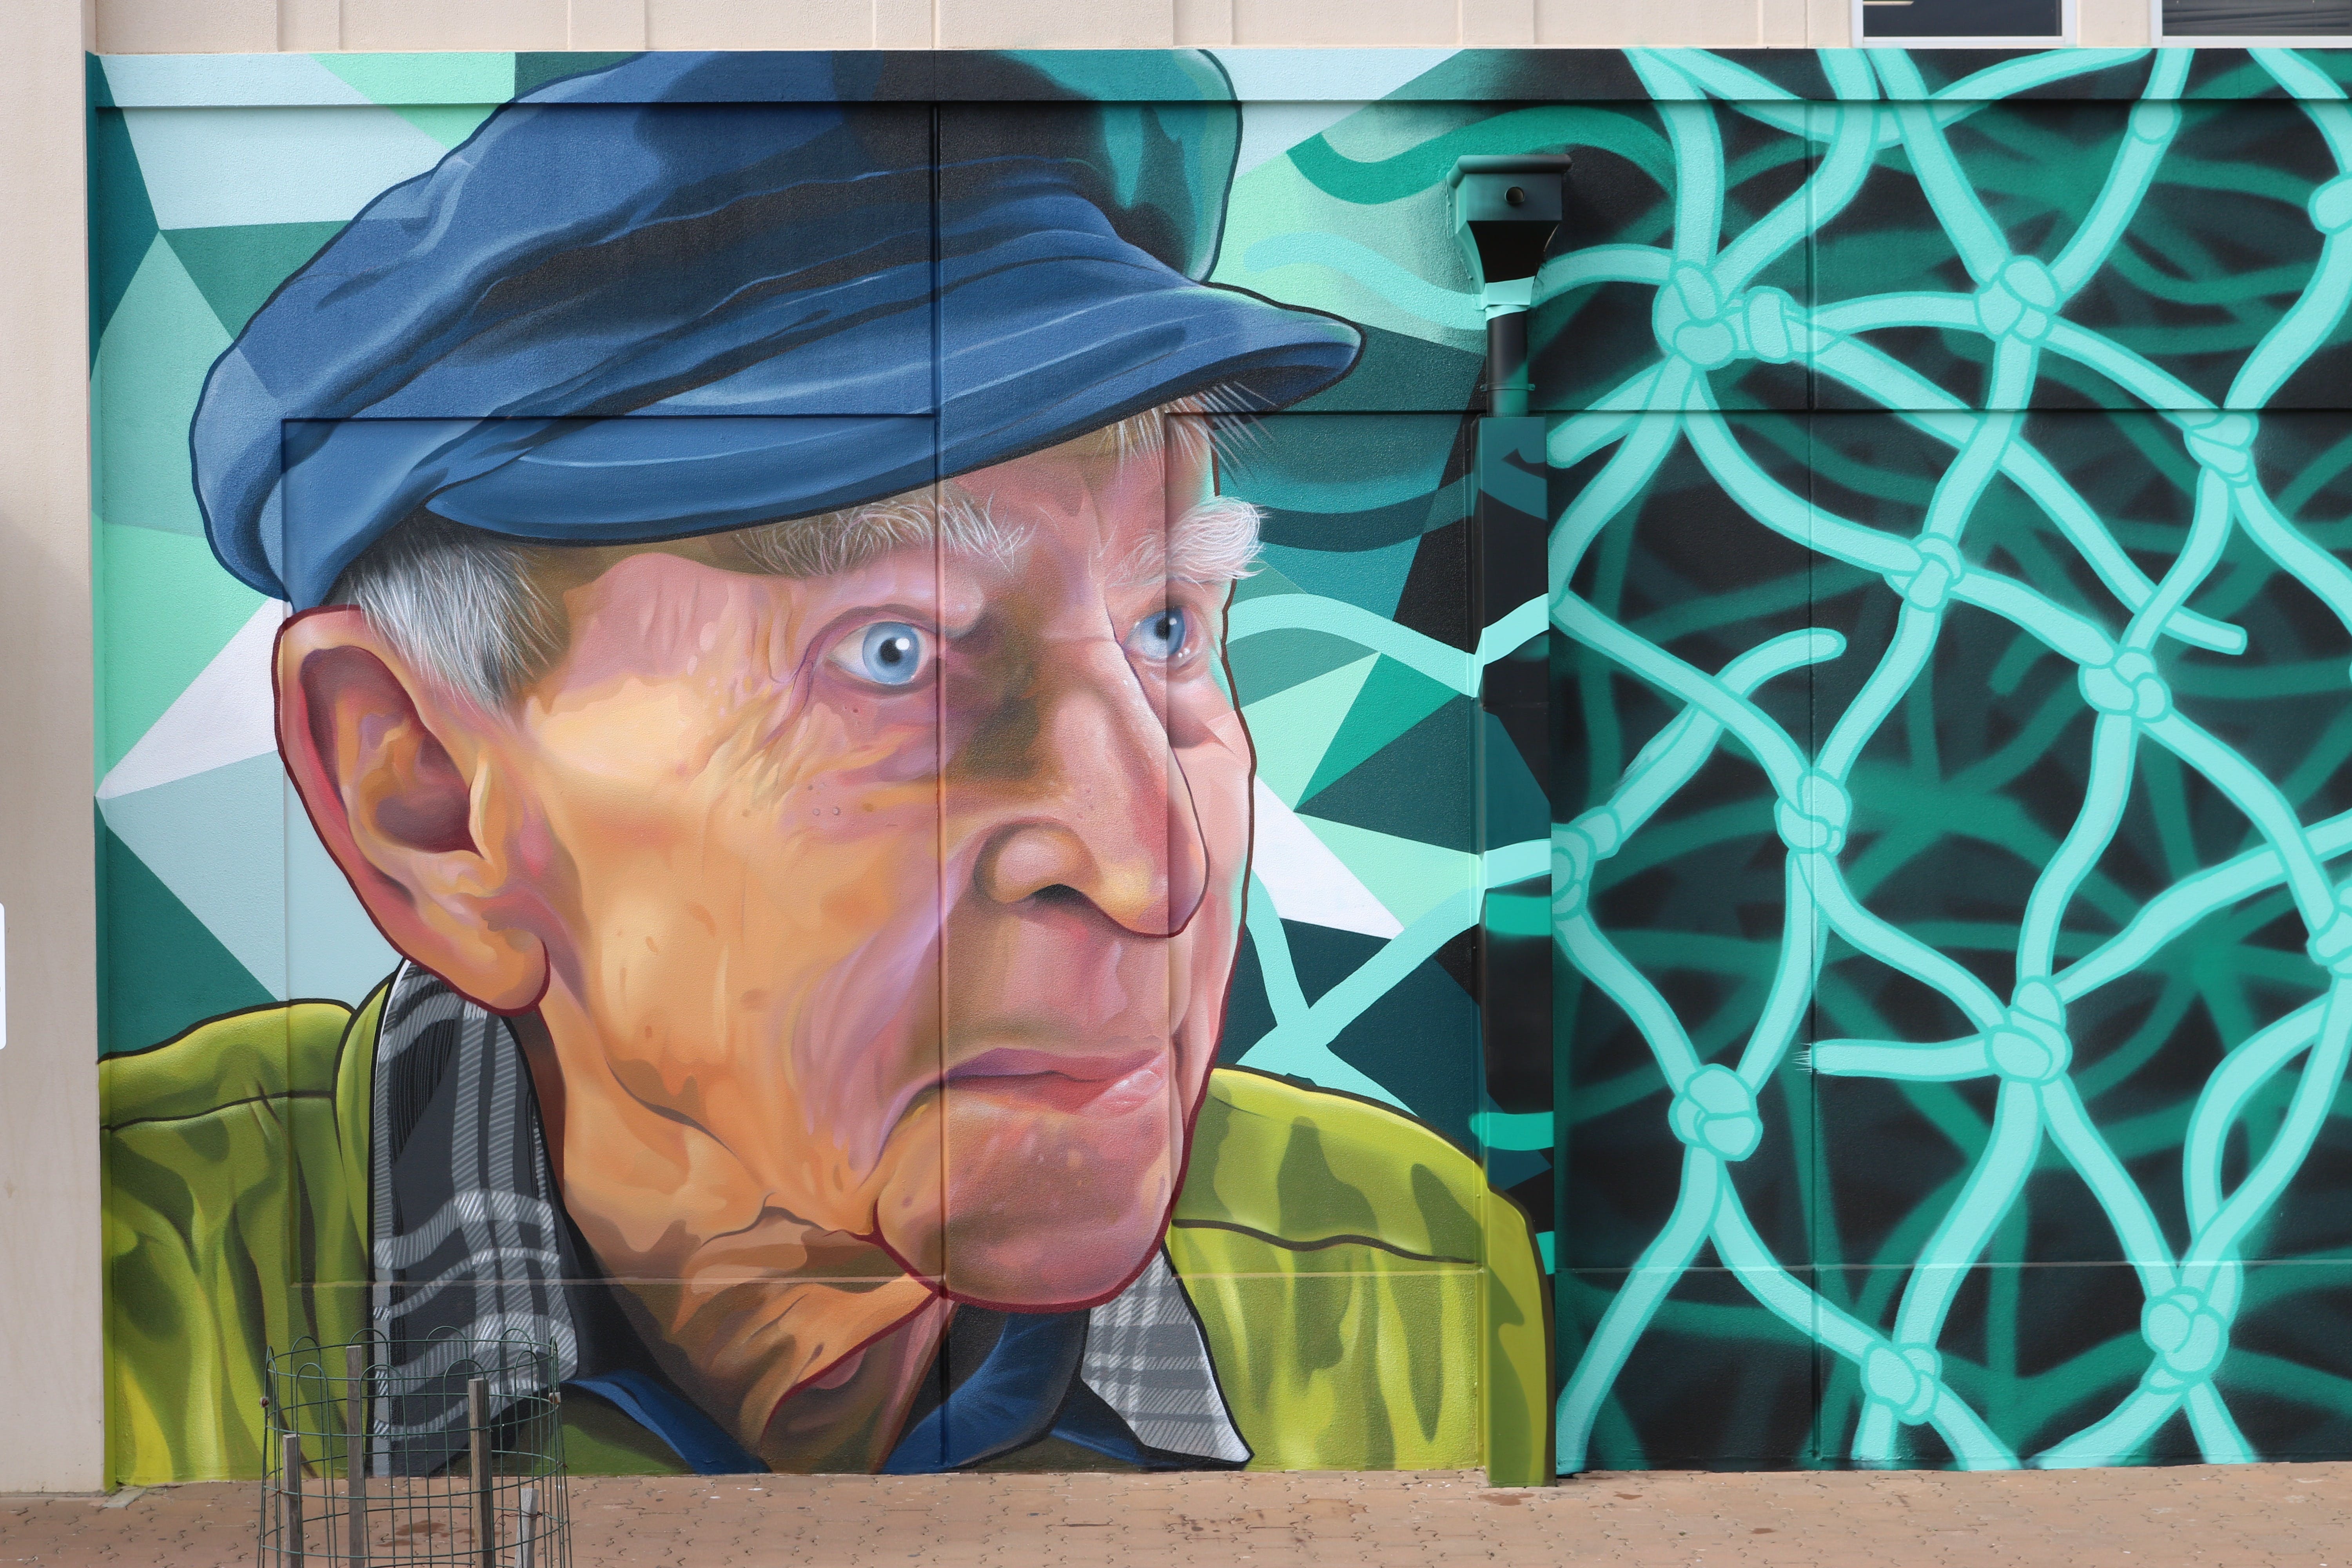 Port Pirie Mural Trail - Find Attractions